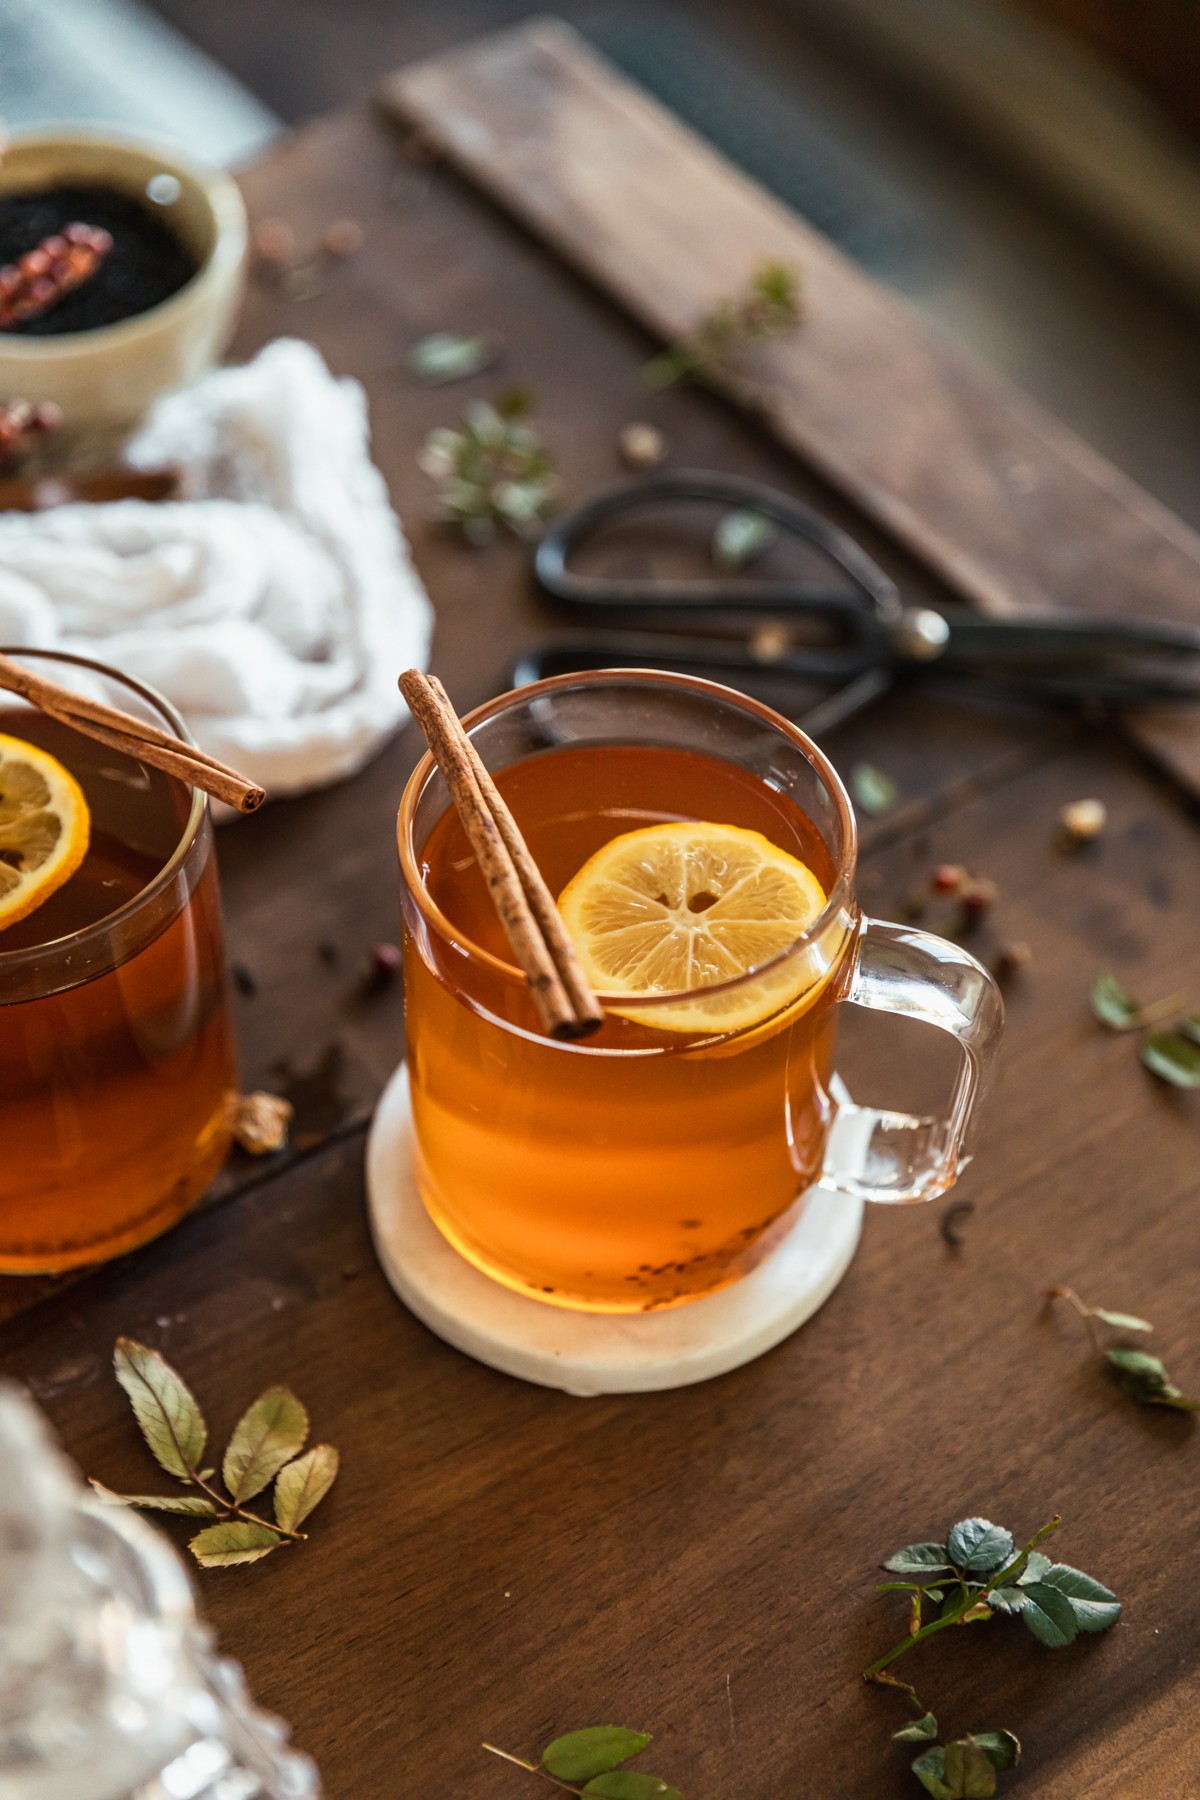 A close up 45-degree shot of a tea hot toddy with a lemon slice and a cinnamon stick on a wood table next to another toddy, a pair of vintage scissors, a white towel, and tea laves.